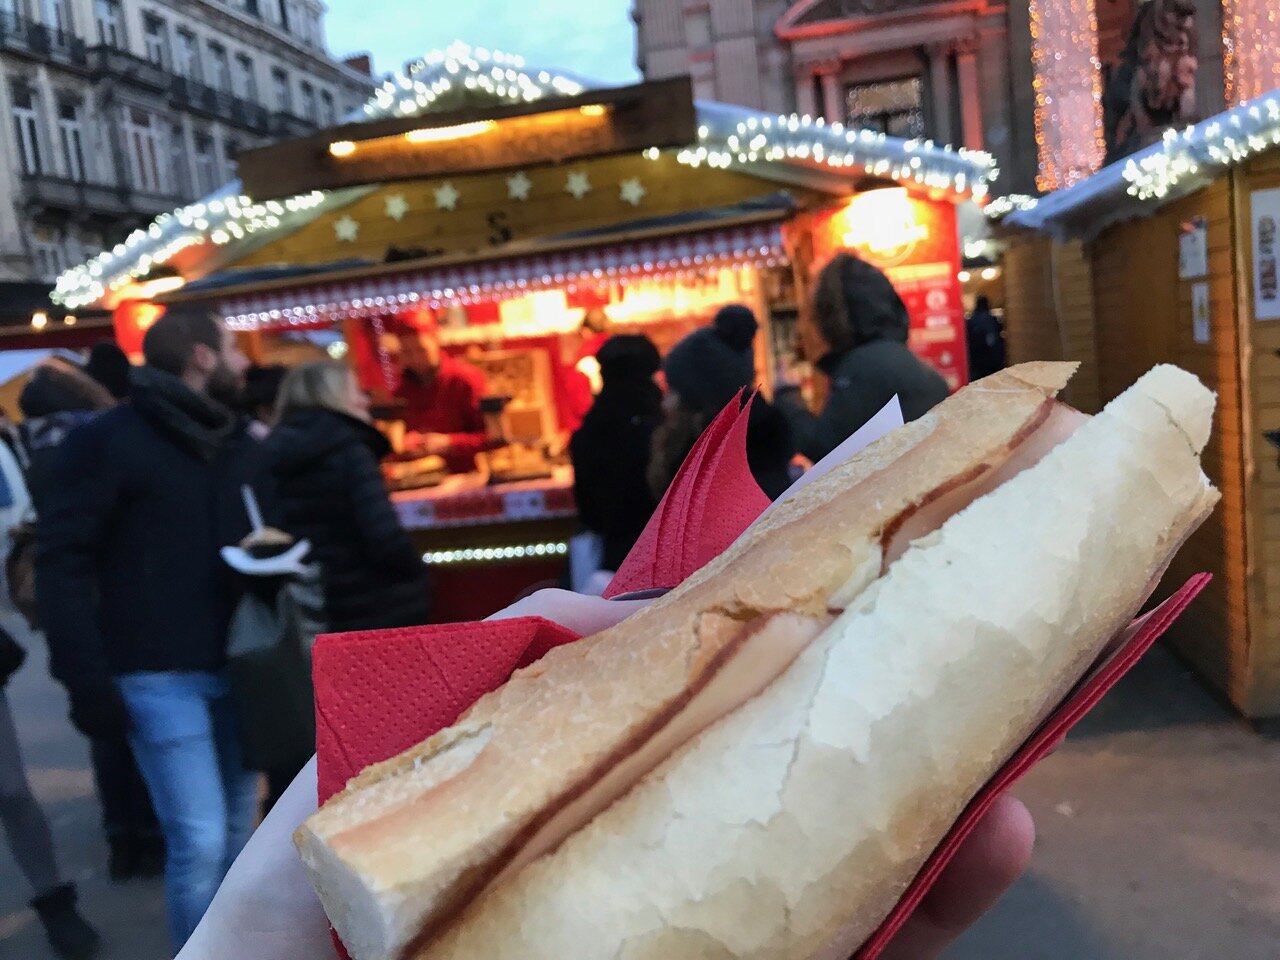 Get your warm raclette baguette at a Christmas market in Belgium and let it change your life! 